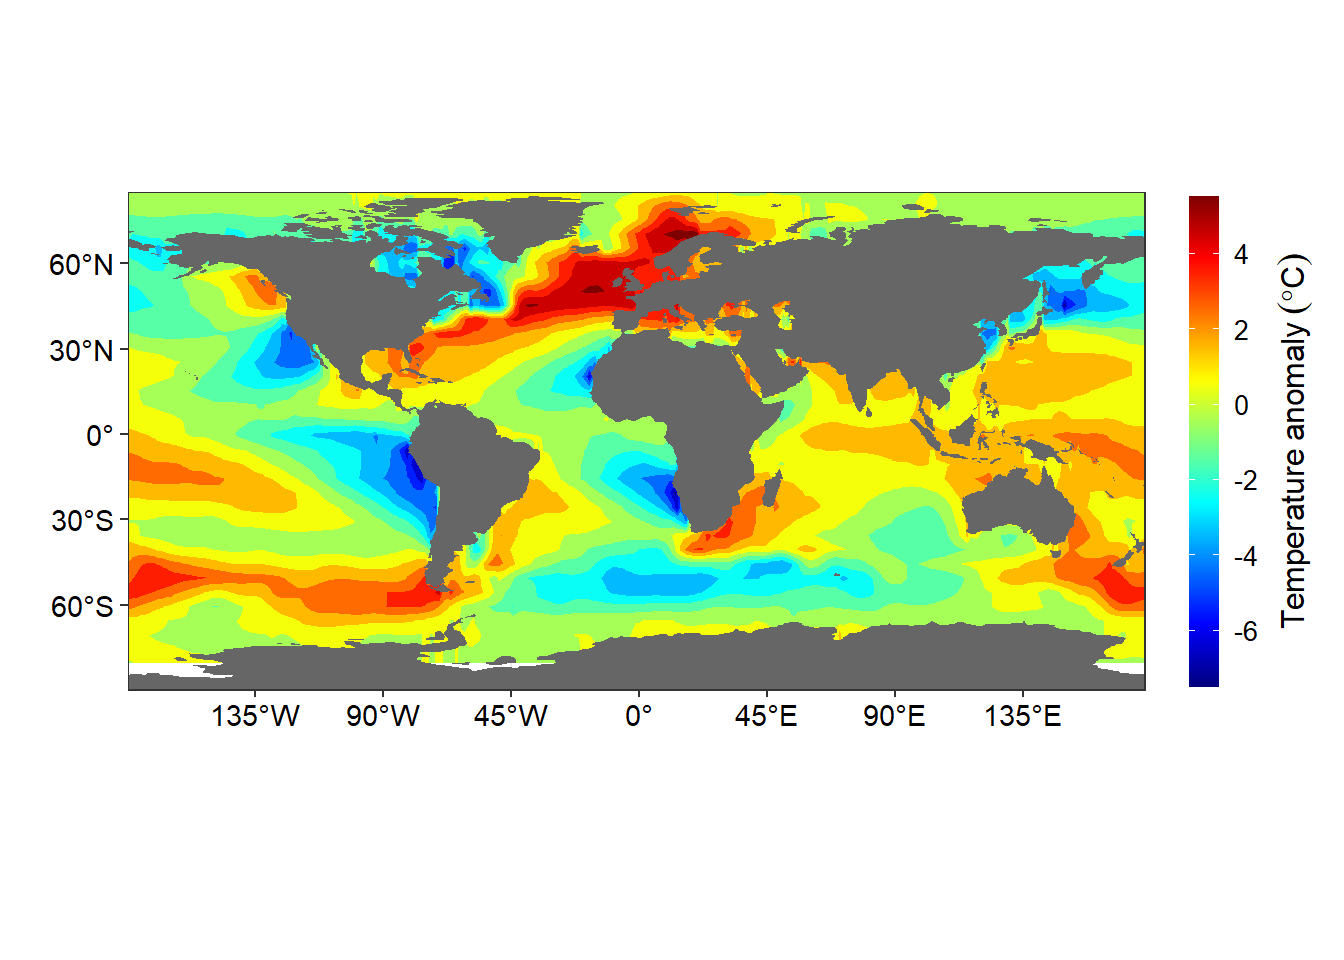 Departure of the sea surfae temprature at each location from the zonally averaged field